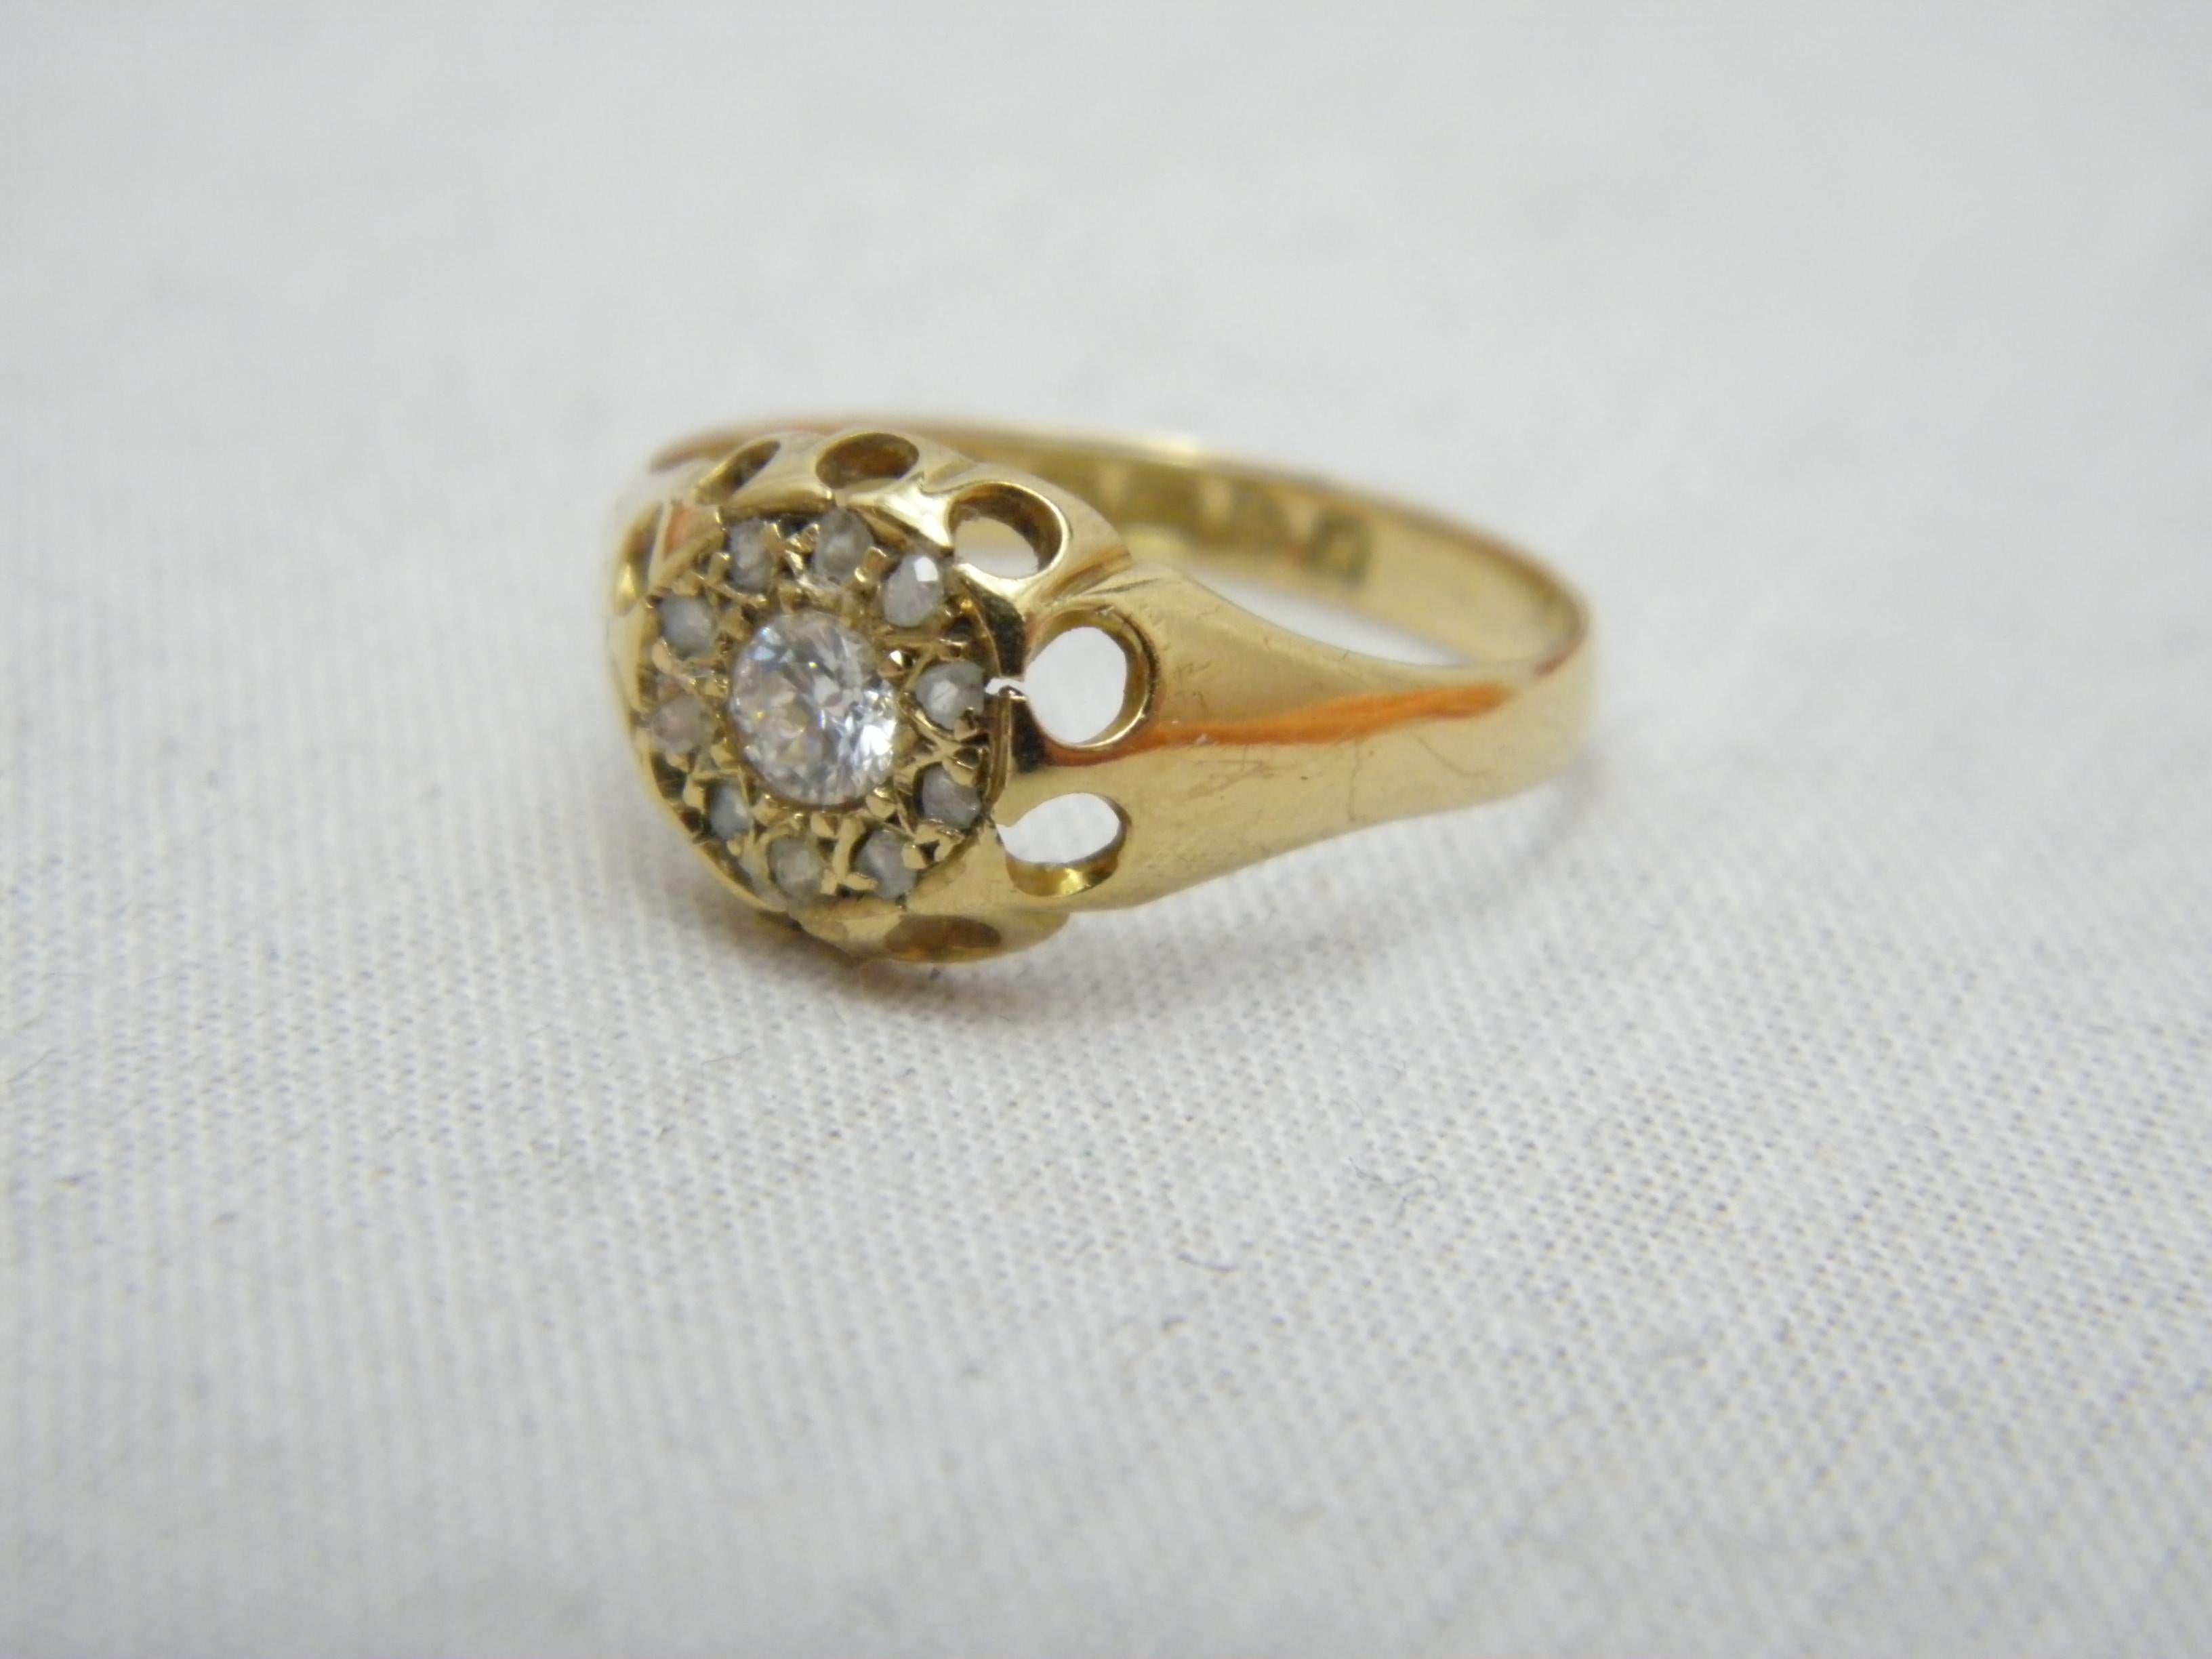 Antique 18ct Gold Diamond Halo Cluster Gypsy Ring Size N 6.75 750 Purity Chester In Good Condition For Sale In Camelford, GB